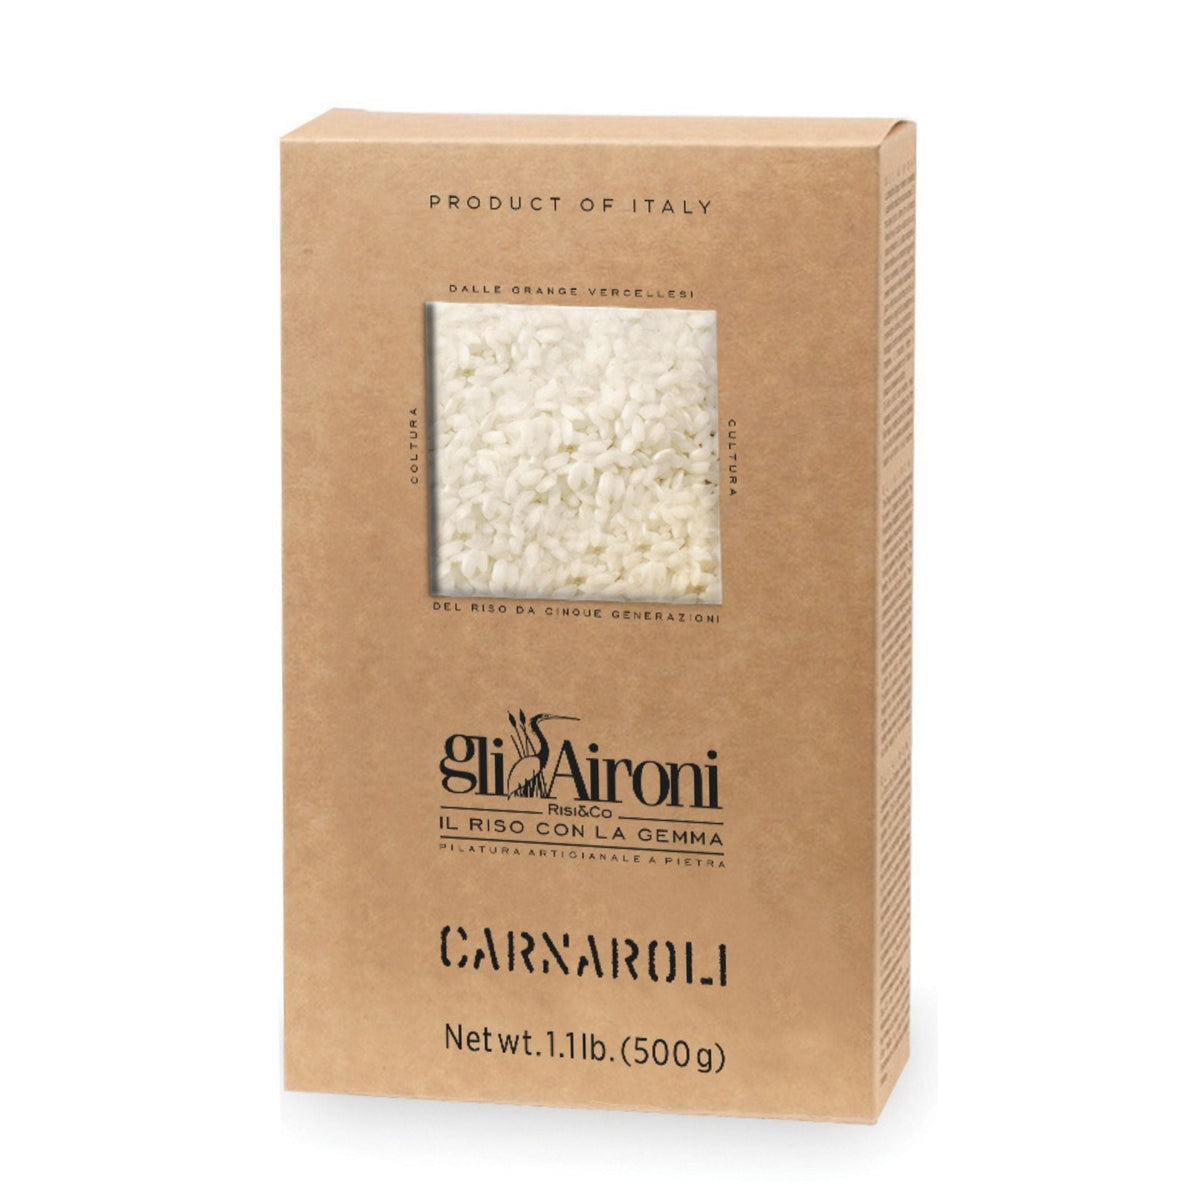 Gli Aironi Carnaroli Rice 500g (Box)  | Imported and distributed in the UK by Just Gourmet Foods